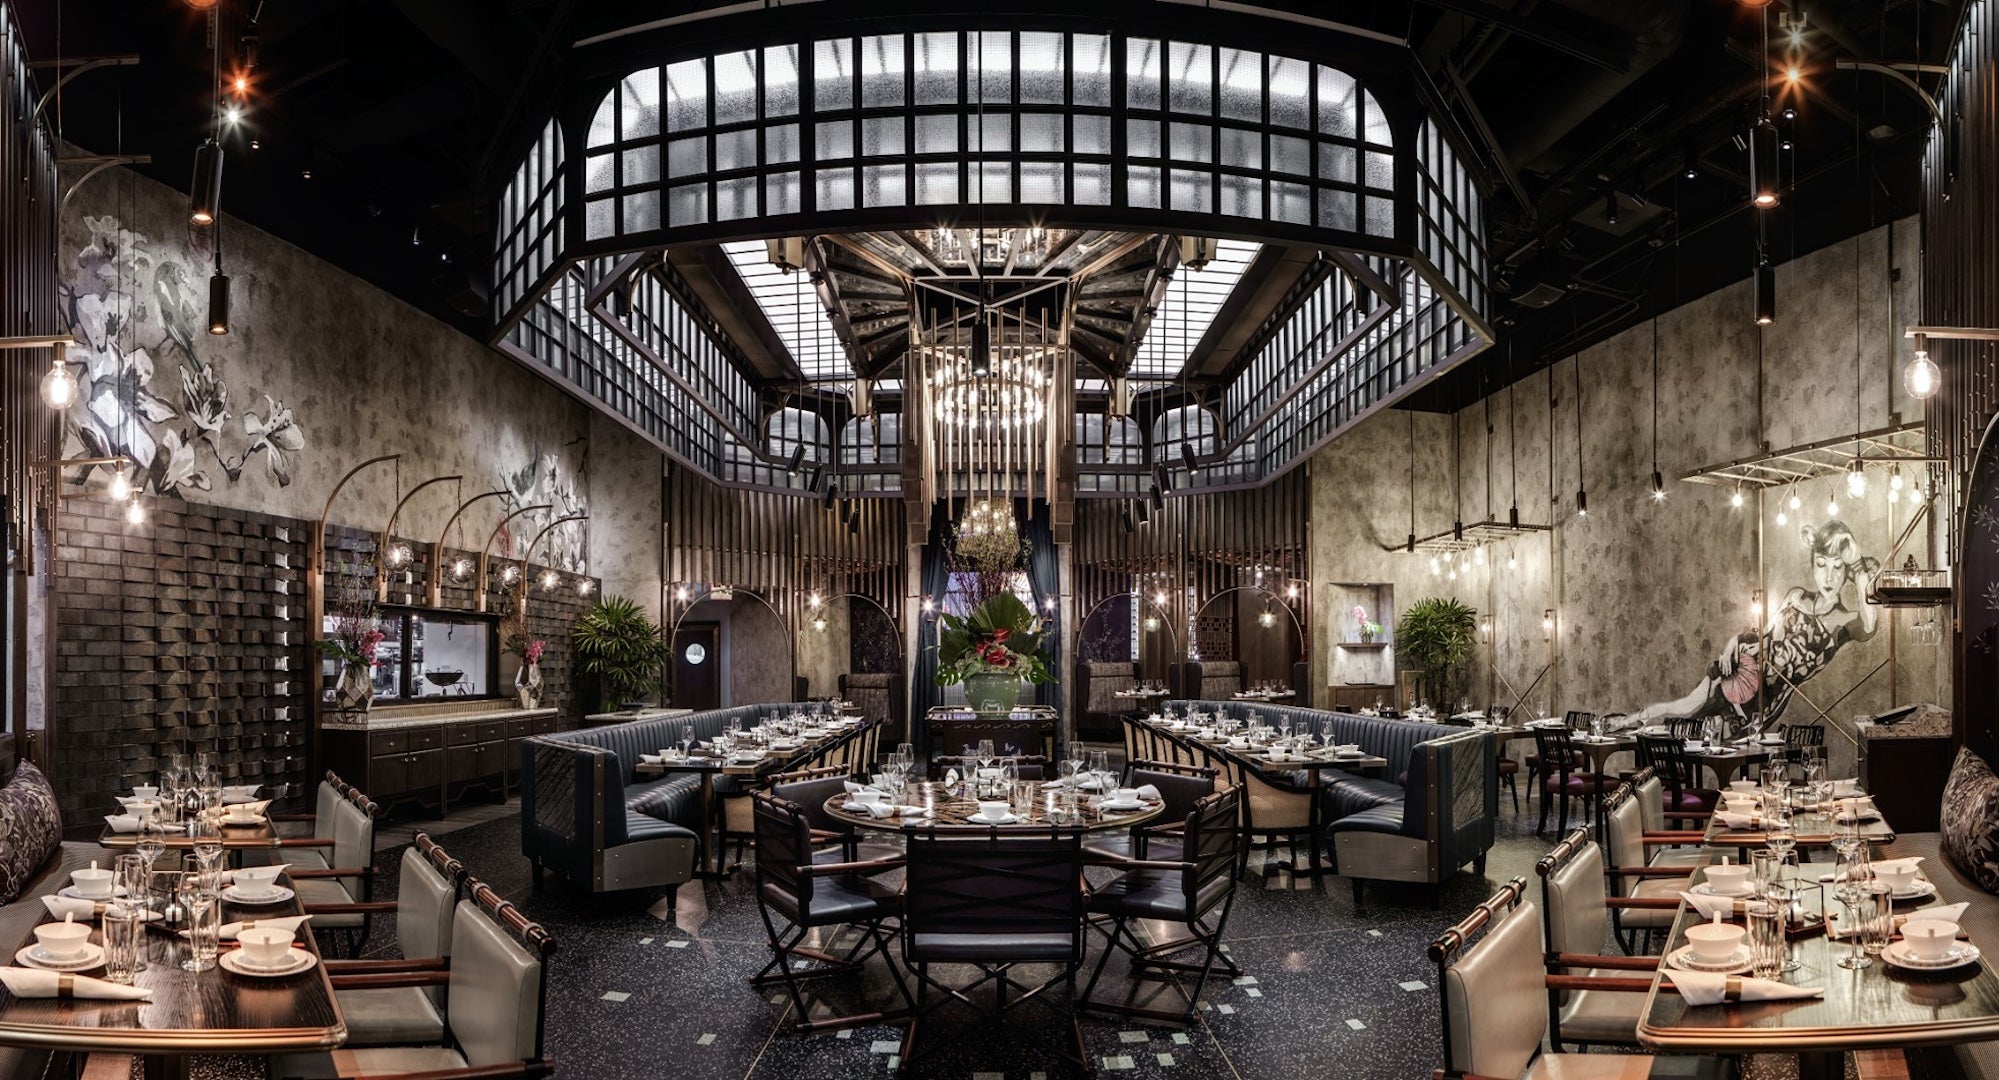 Internal shot of a restaurant with moody decor and a large glass light on the ceiling